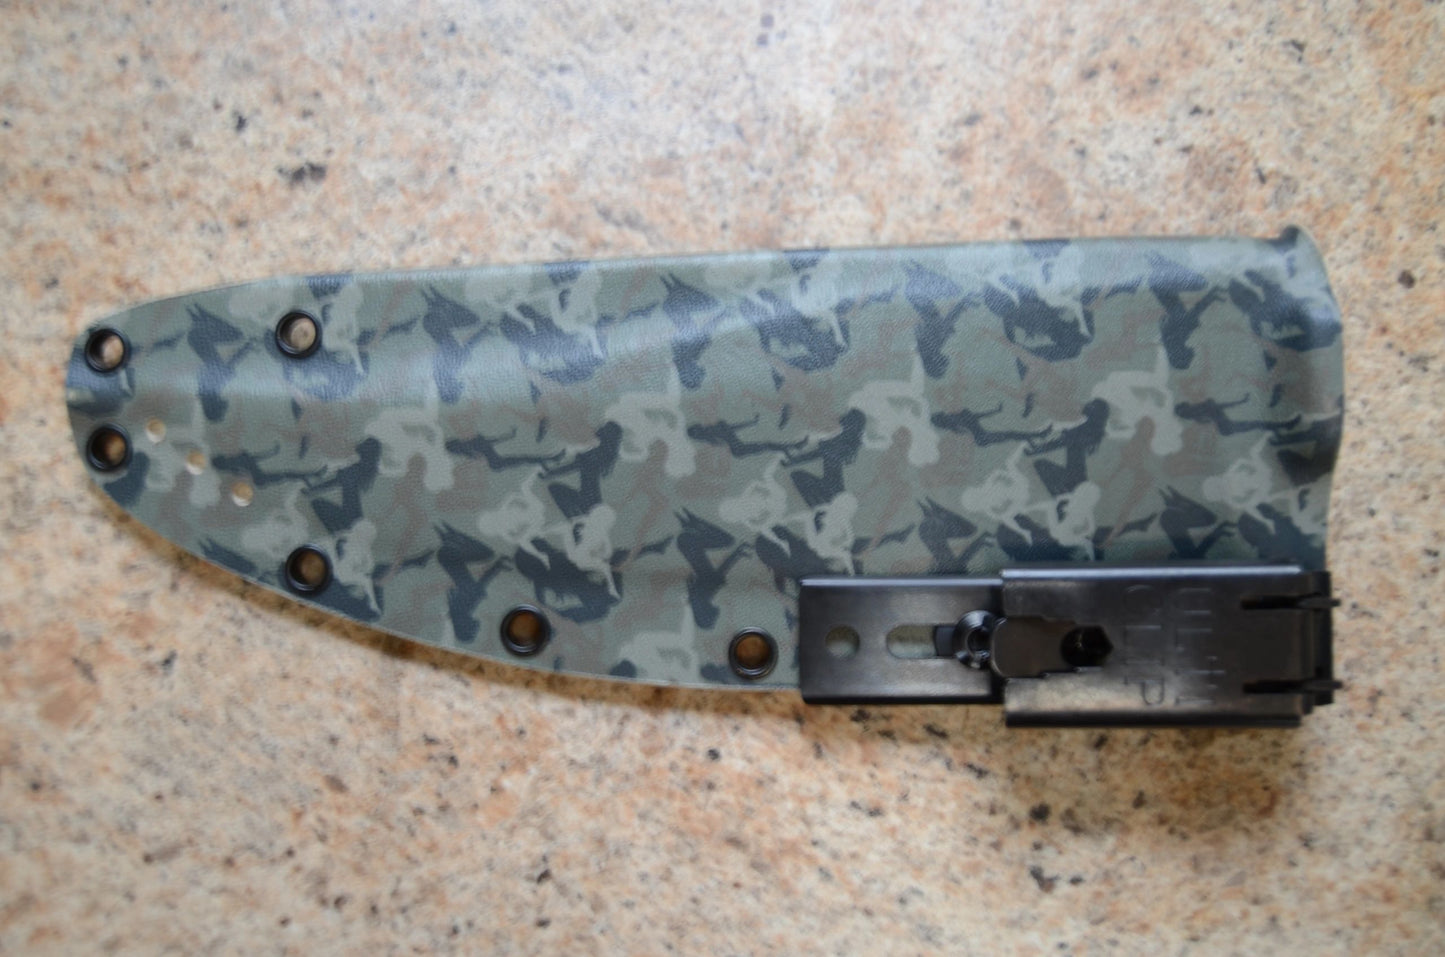 TOPS KNIVES PRATHER WAR BOWIE CUSTOM KYDEX SHEATH BUILT YOUR WAY (KNIFE NOT INCLUDED)